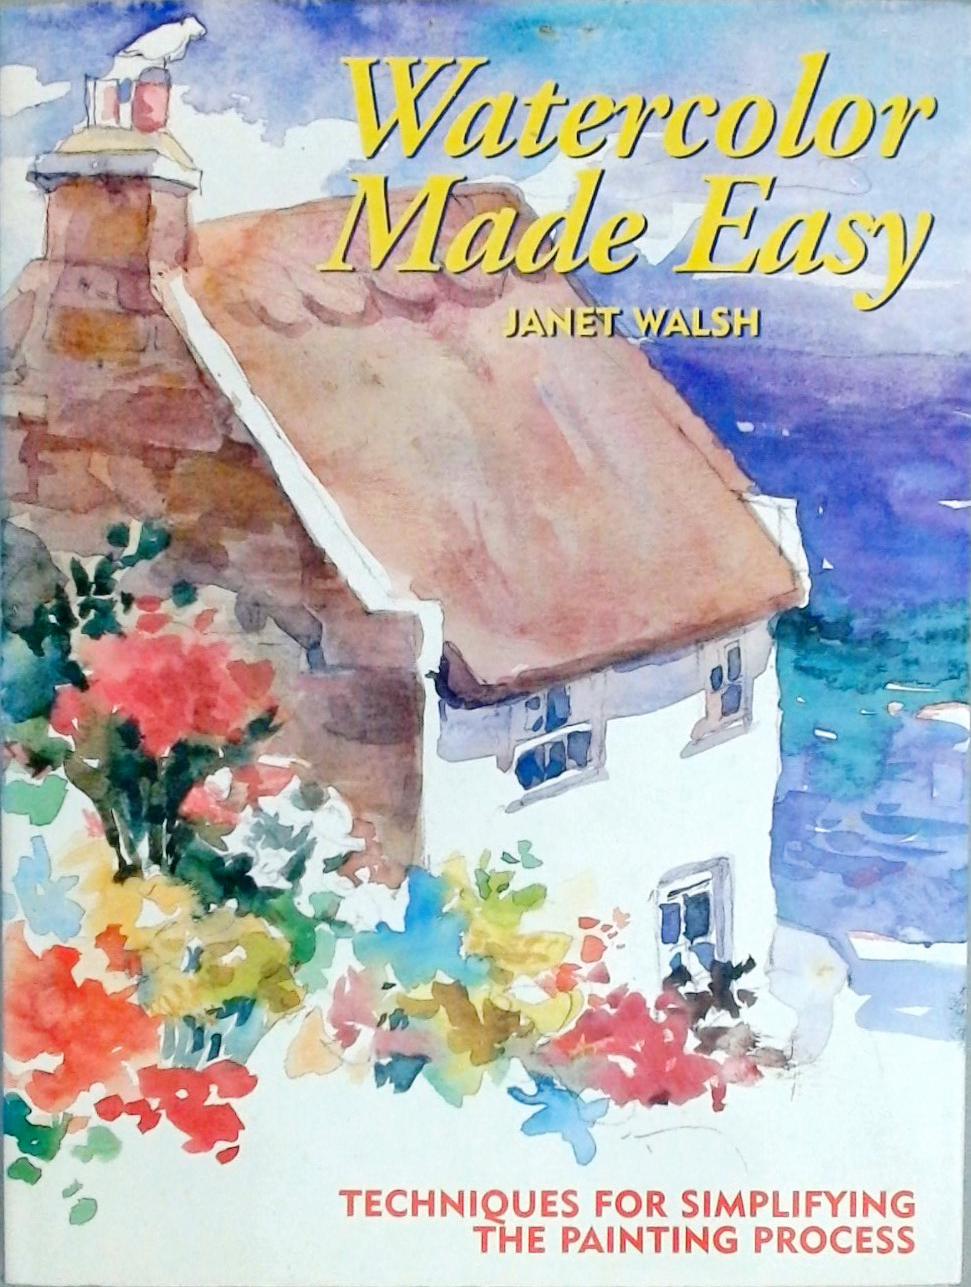 Watercolor Made Easy